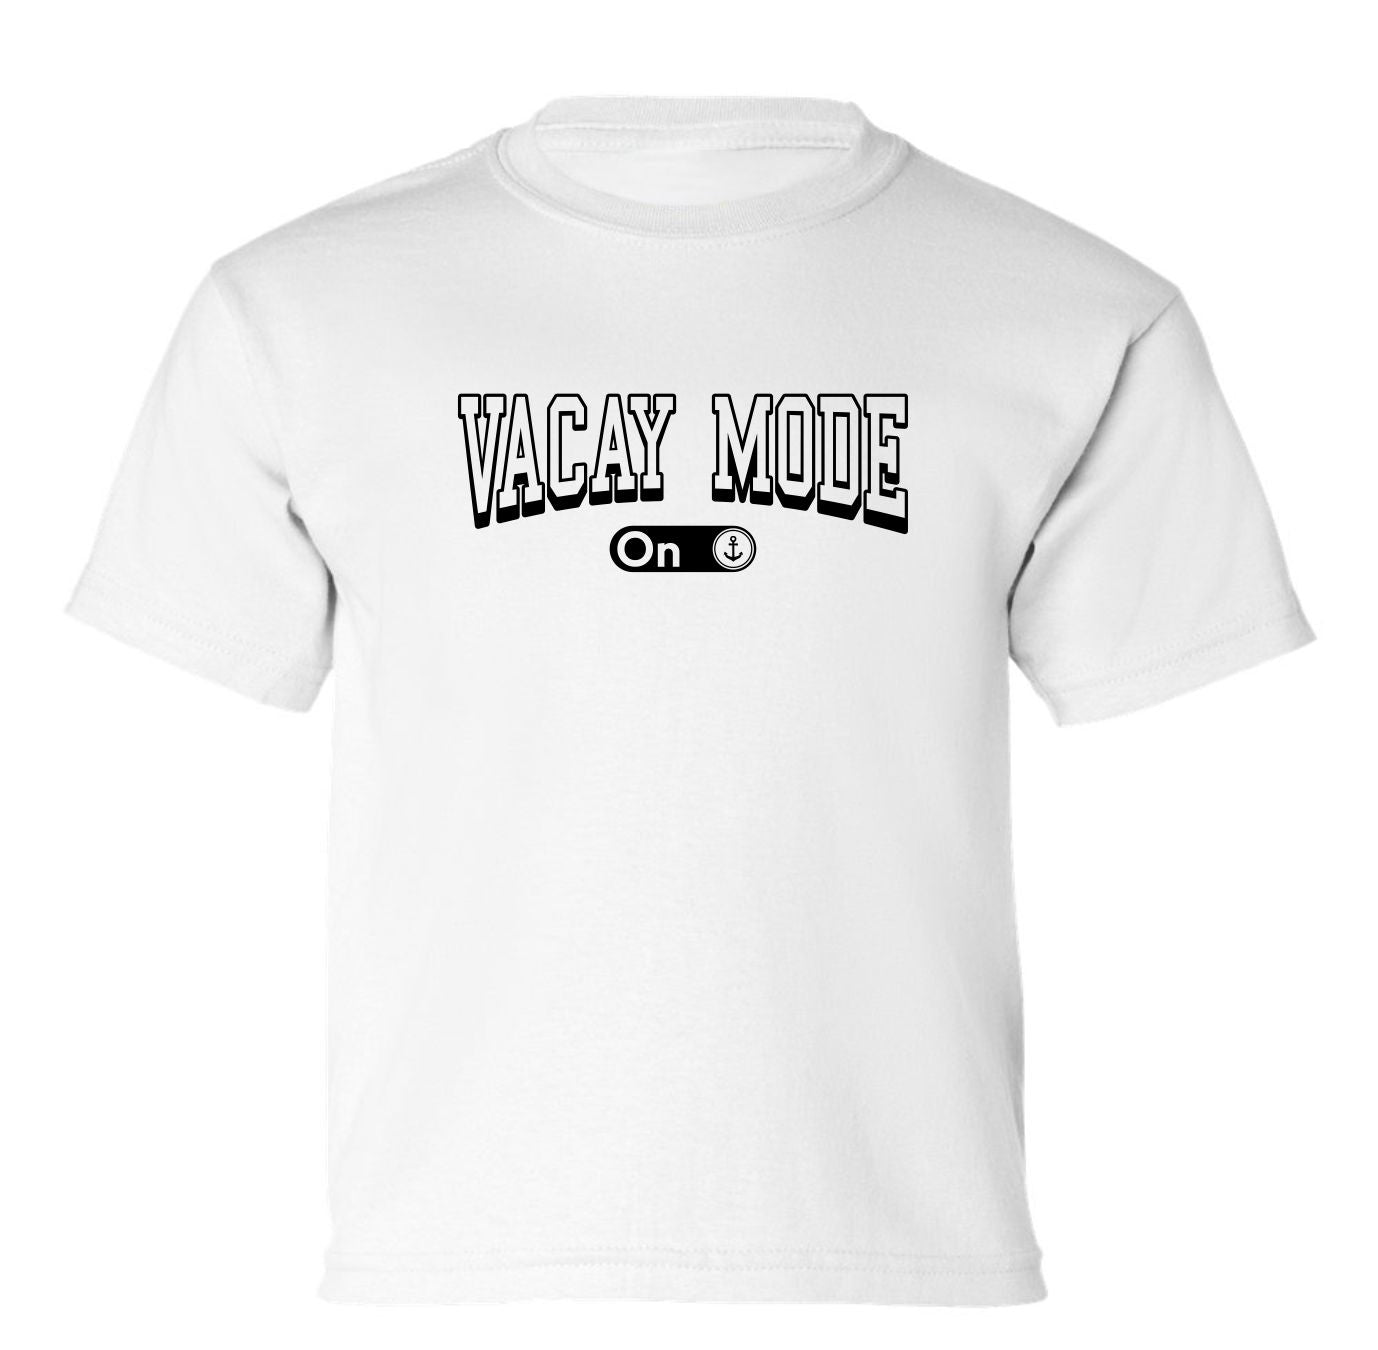 "Vacay Mode" Toddler & Youth T-Shirt